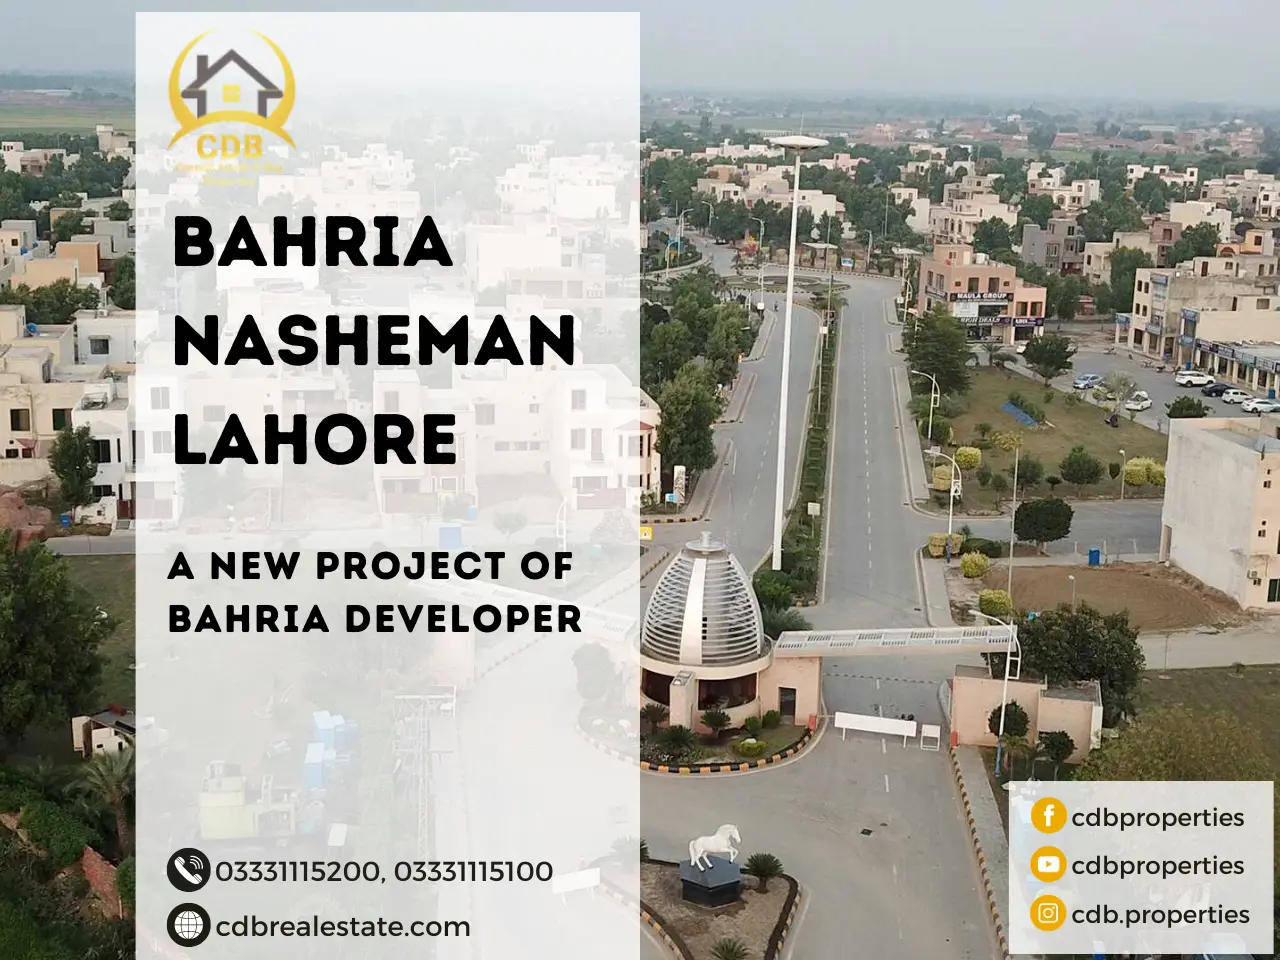 drone view of bahria nasheman lahore